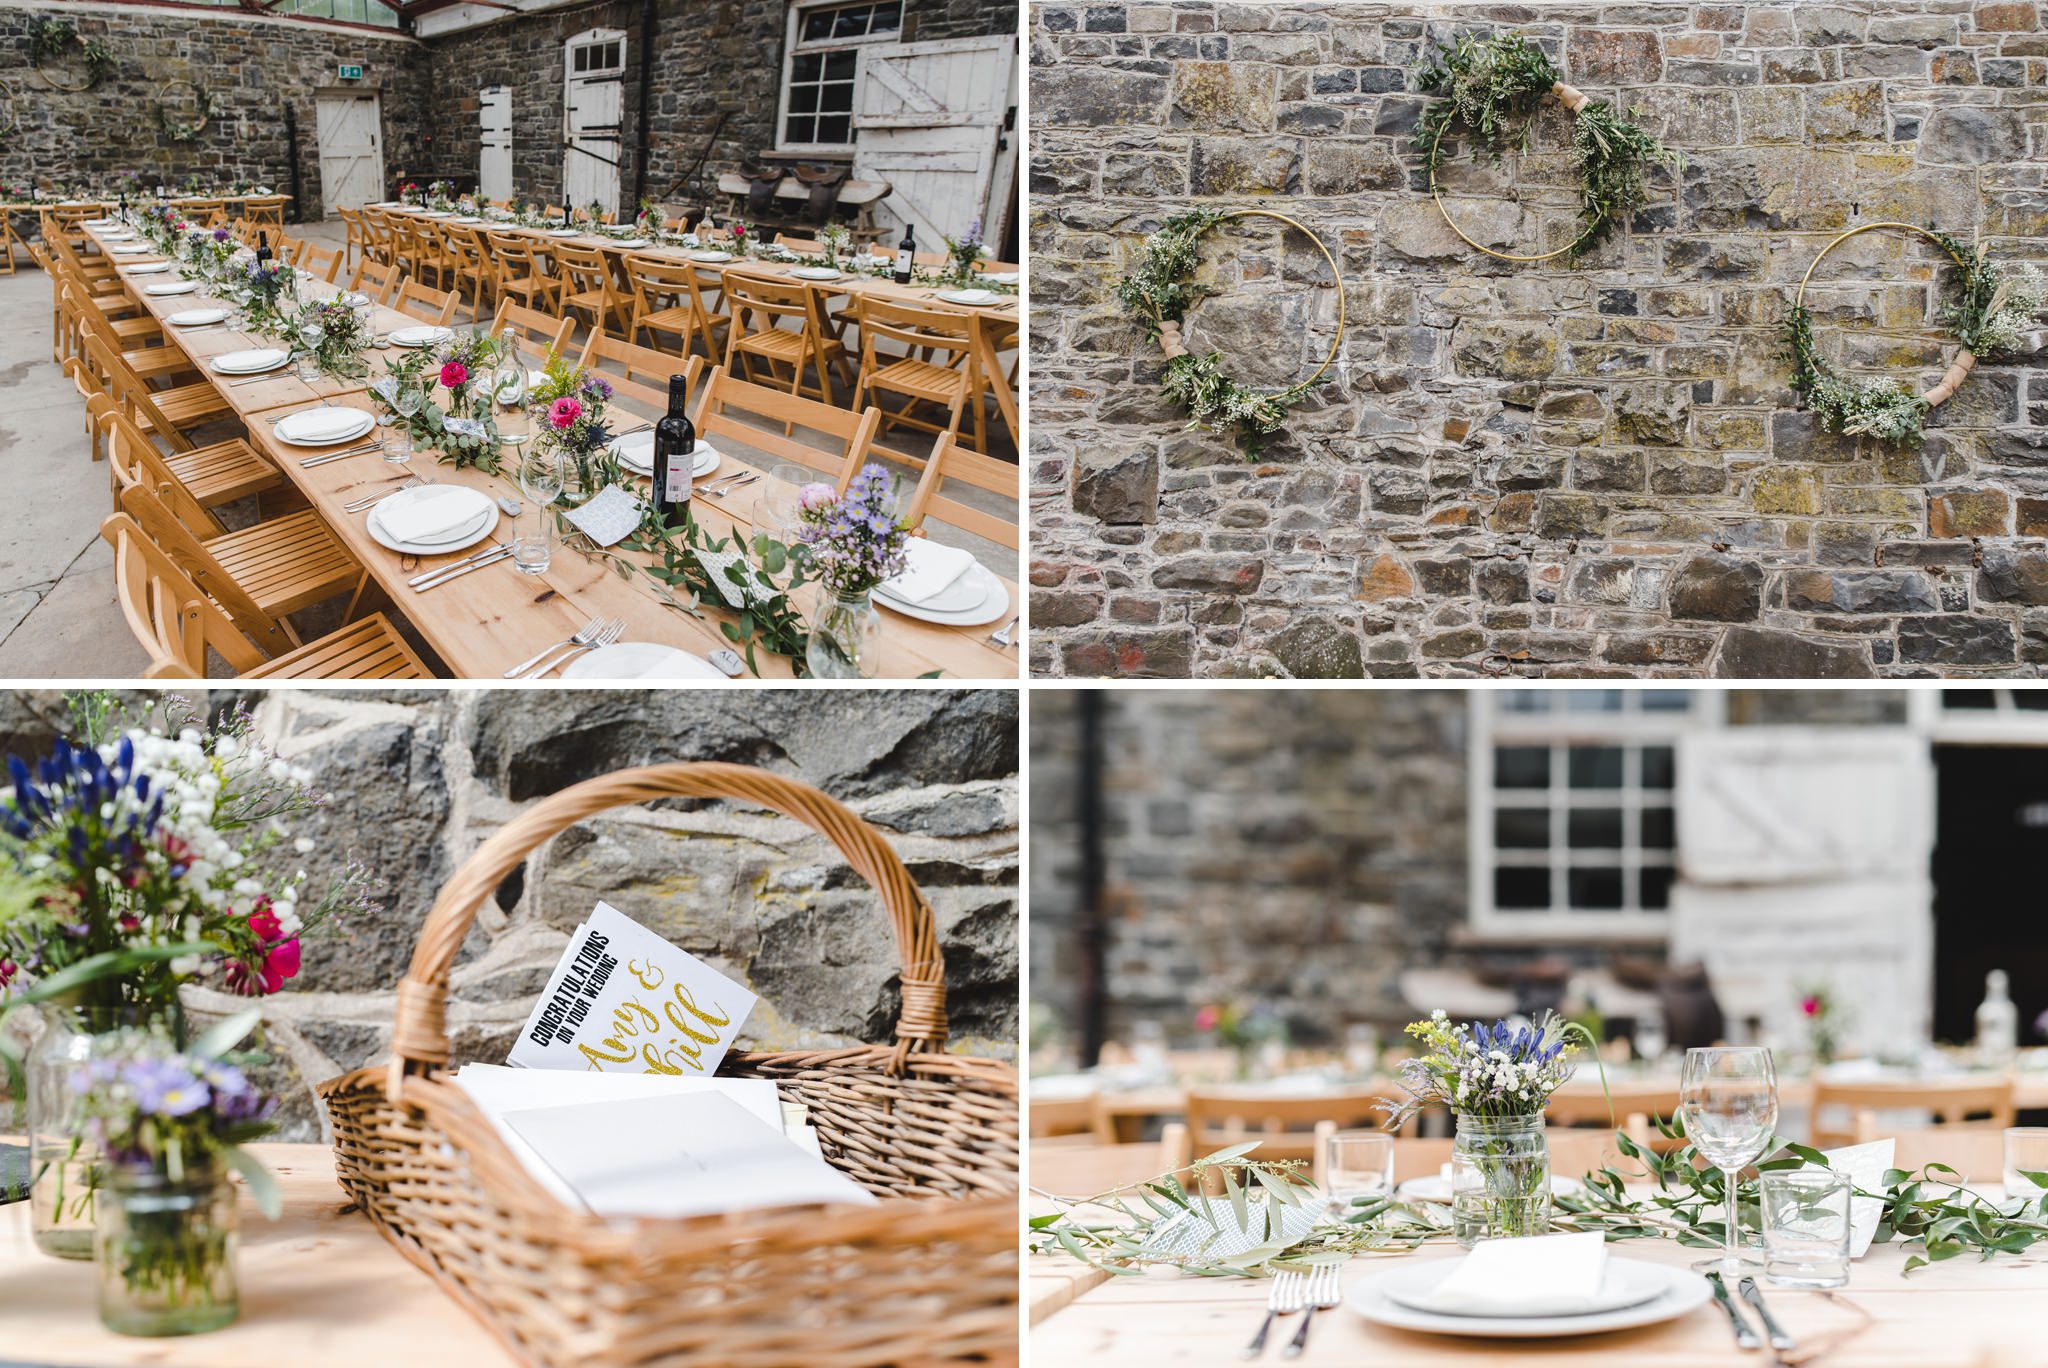 Styling on tables at Plas Dinam